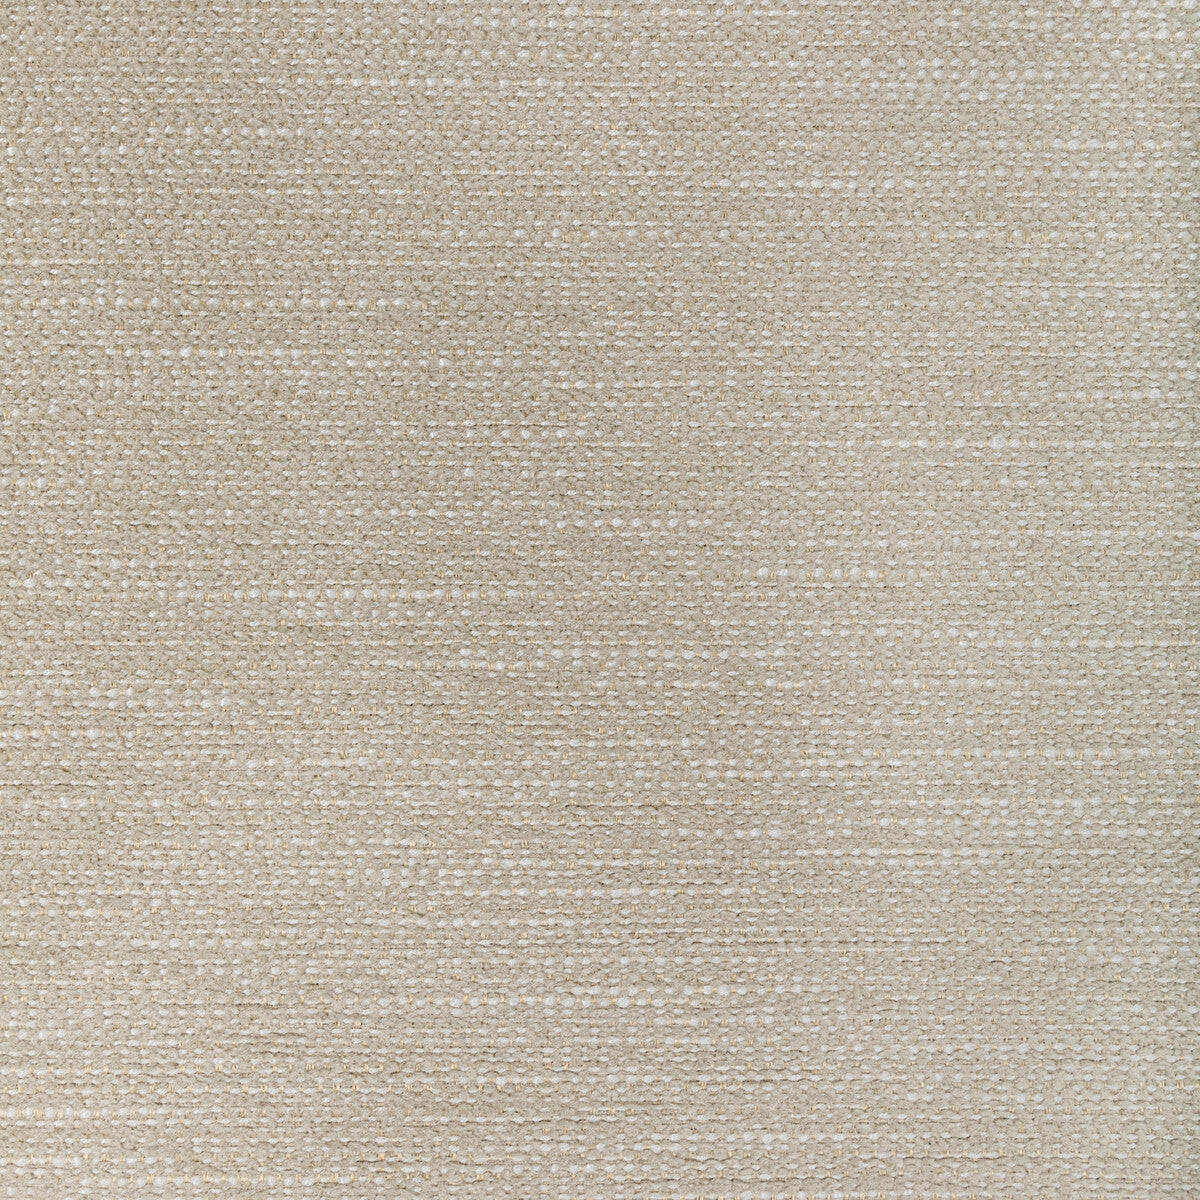 Recoup fabric in sand dollar color - pattern 36569.106.0 - by Kravet Contract in the Seaqual collection